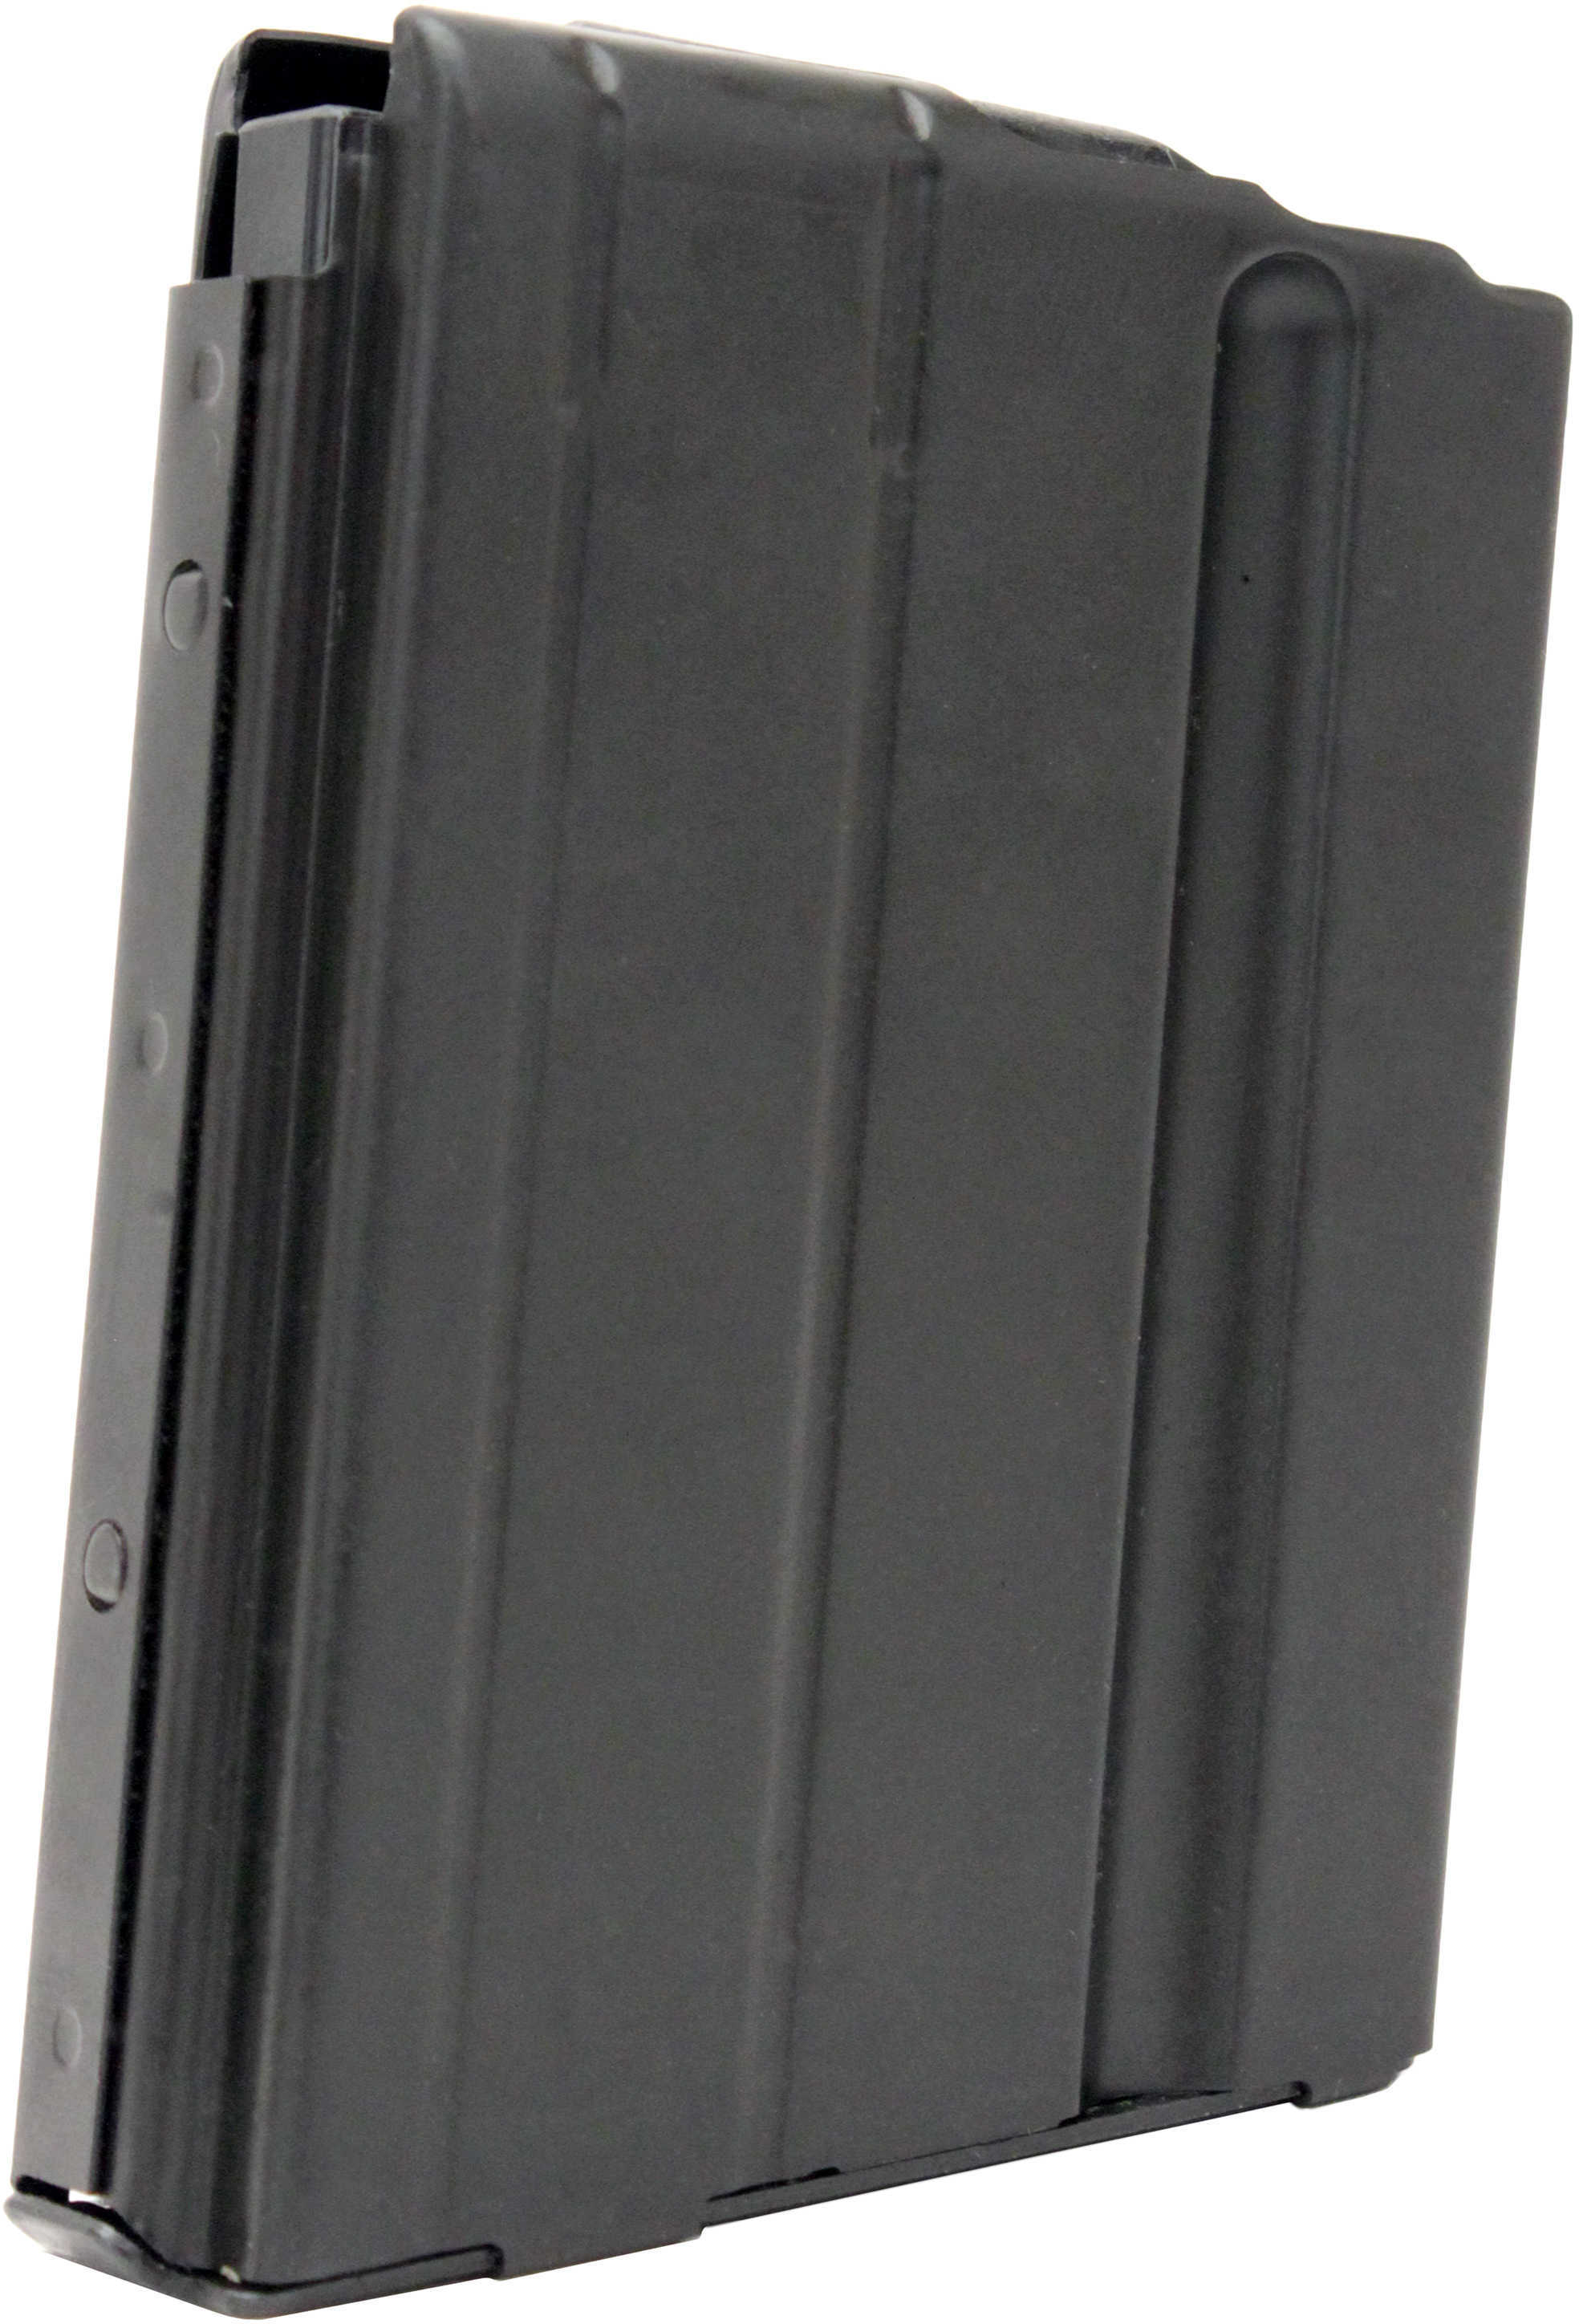 Cpd Magazine AR15 7.62X39 10Rd Blackened Stainless Steel